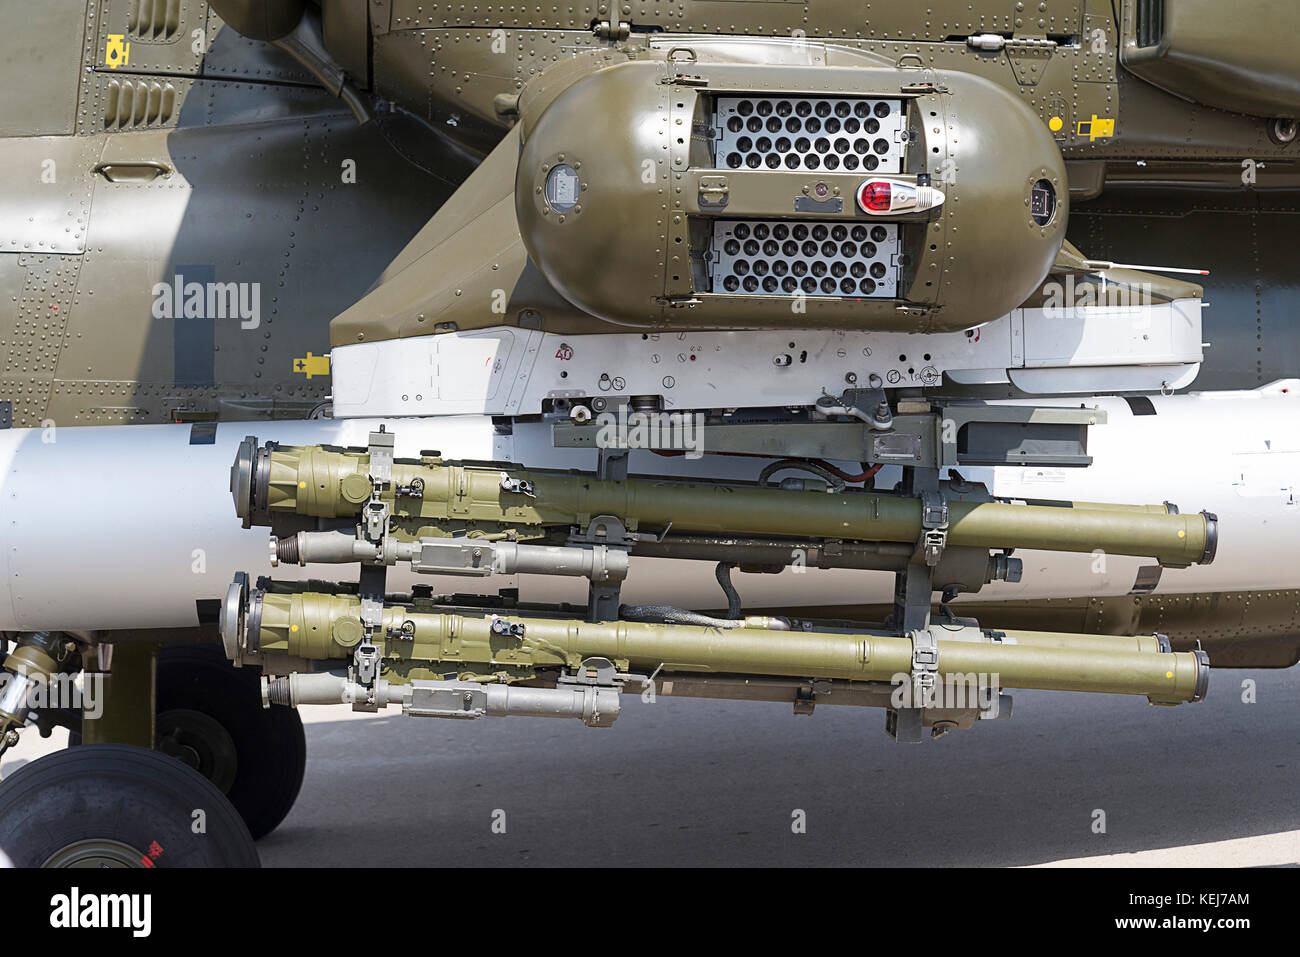 Missiles under the wing of the helicopter at the international exhibition in Russia. Stock Photo